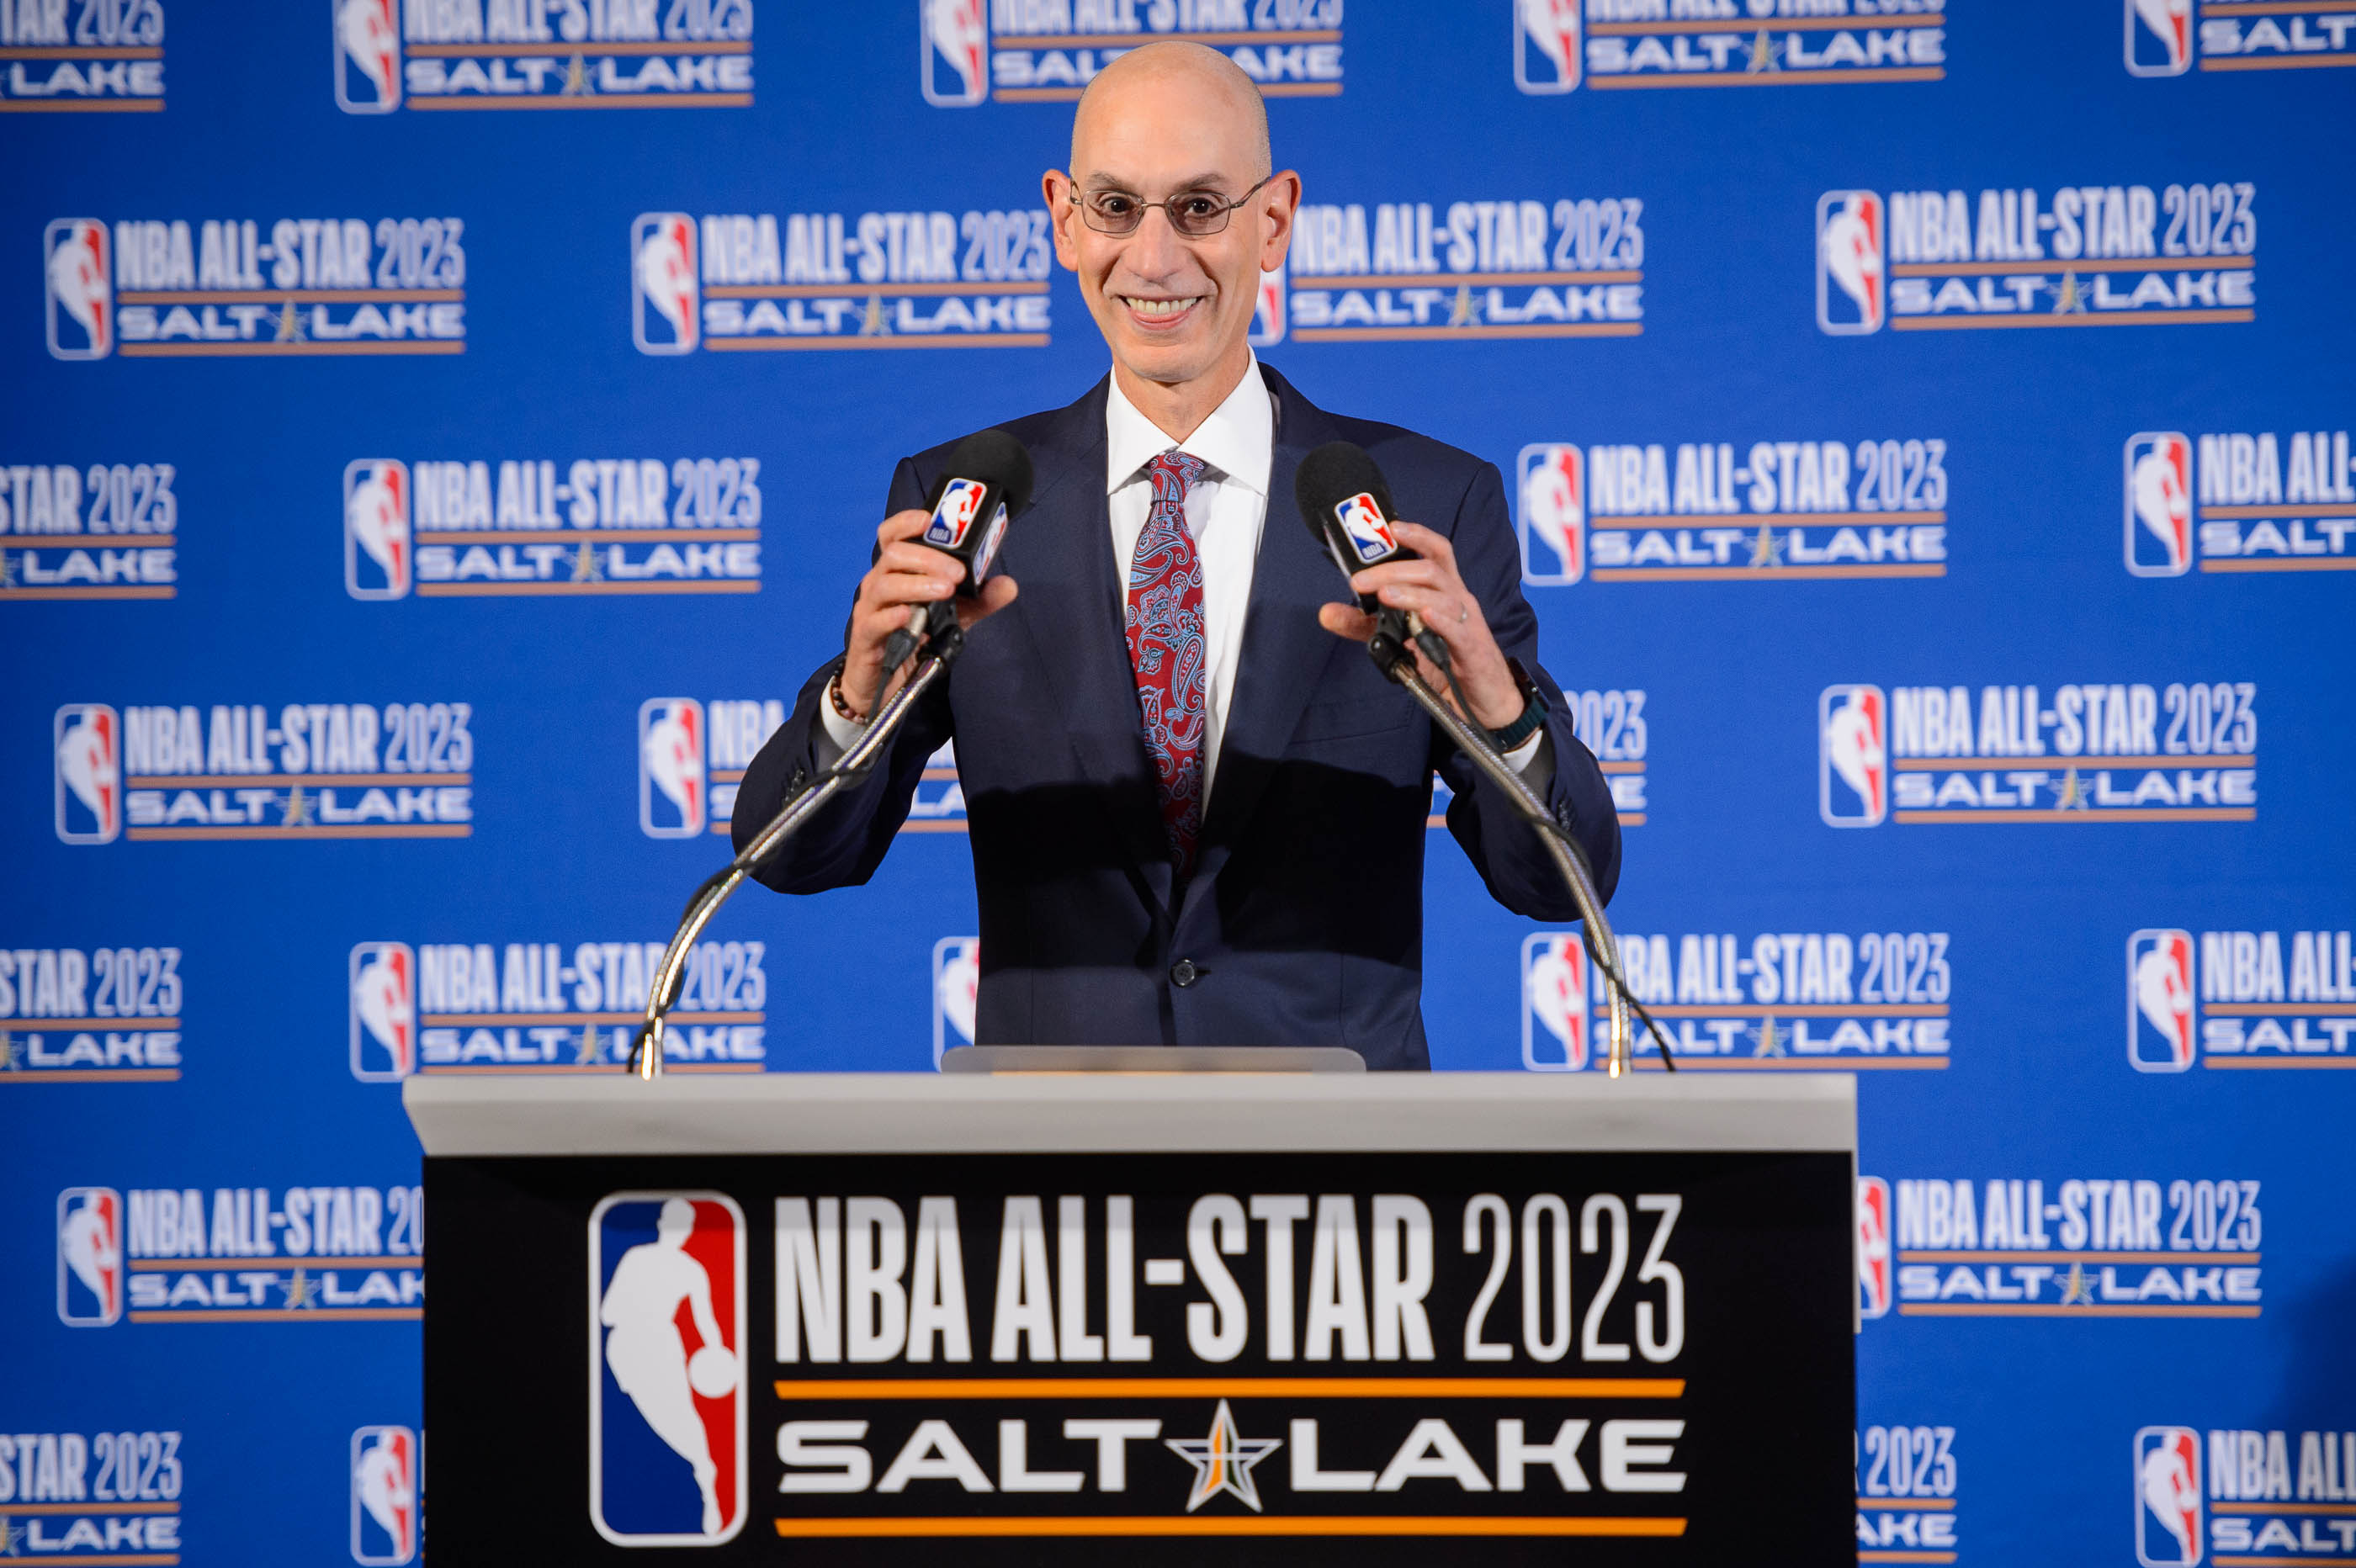 2023 NBA All-Star Game: How it ended up in Salt Lake City